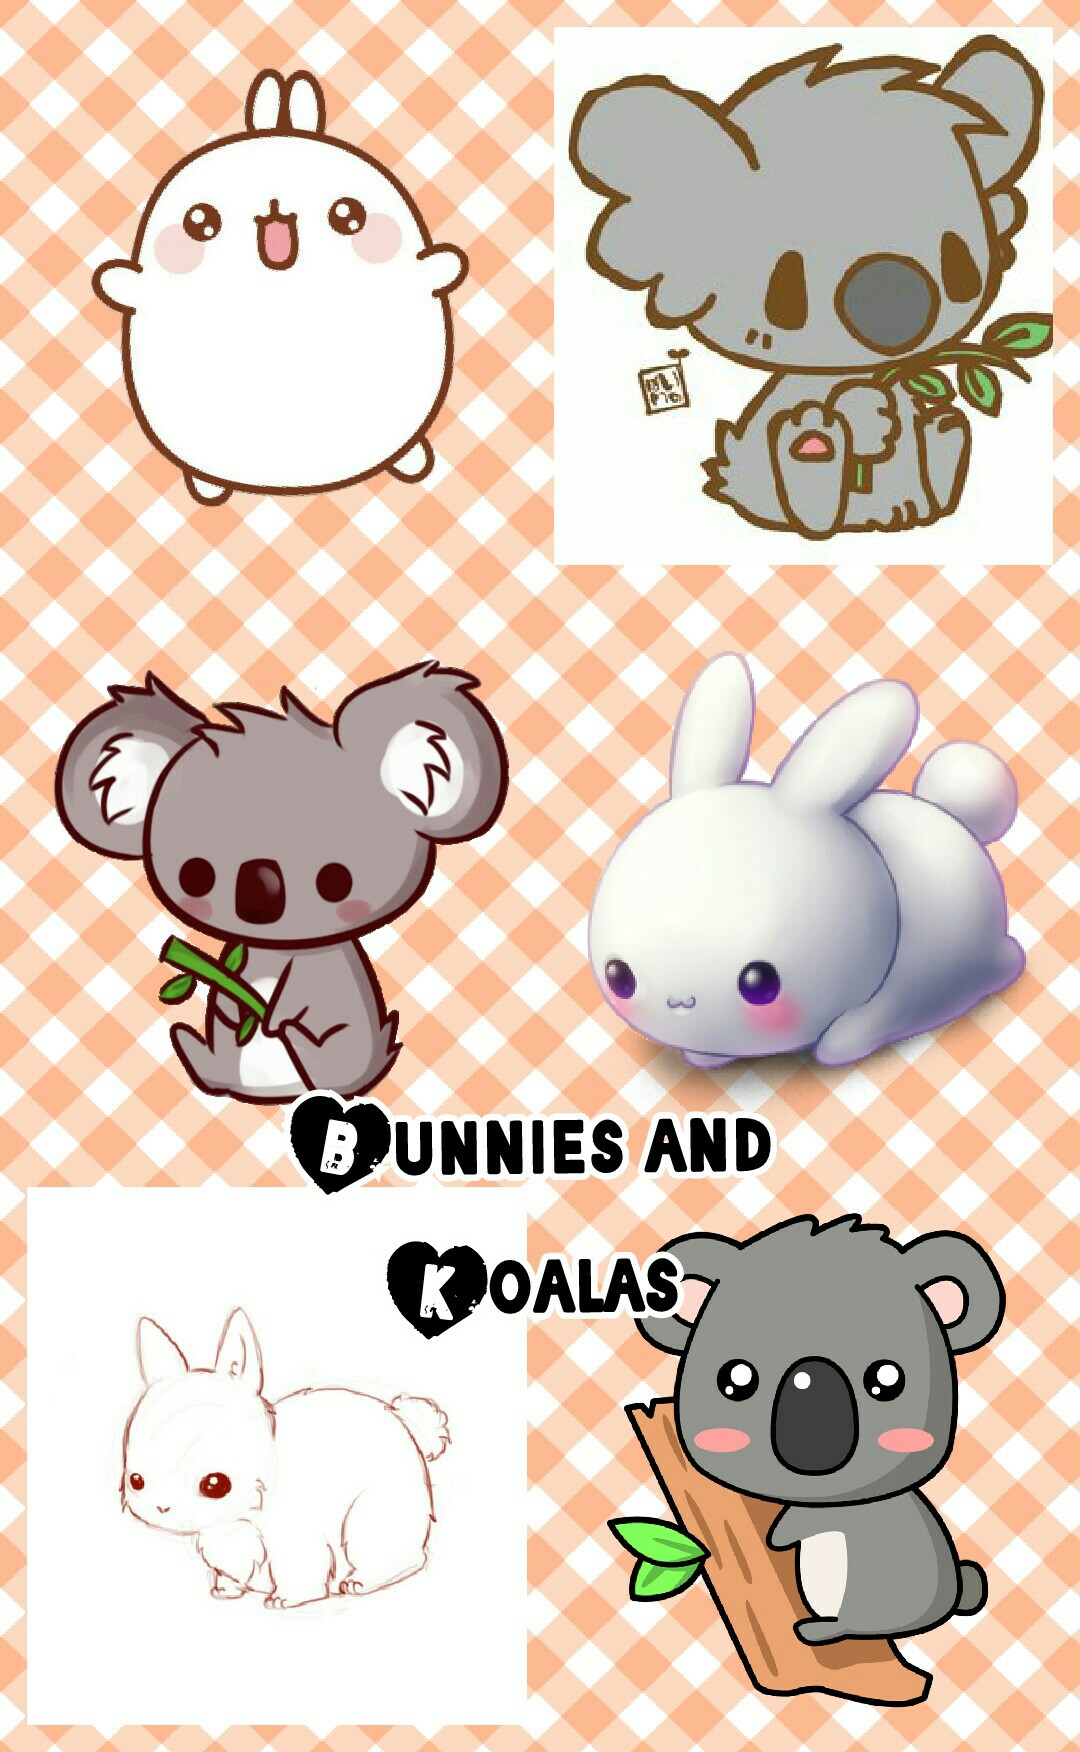 Bunnies and 
Koalas because why not? cute things never hurt anybody ^_^